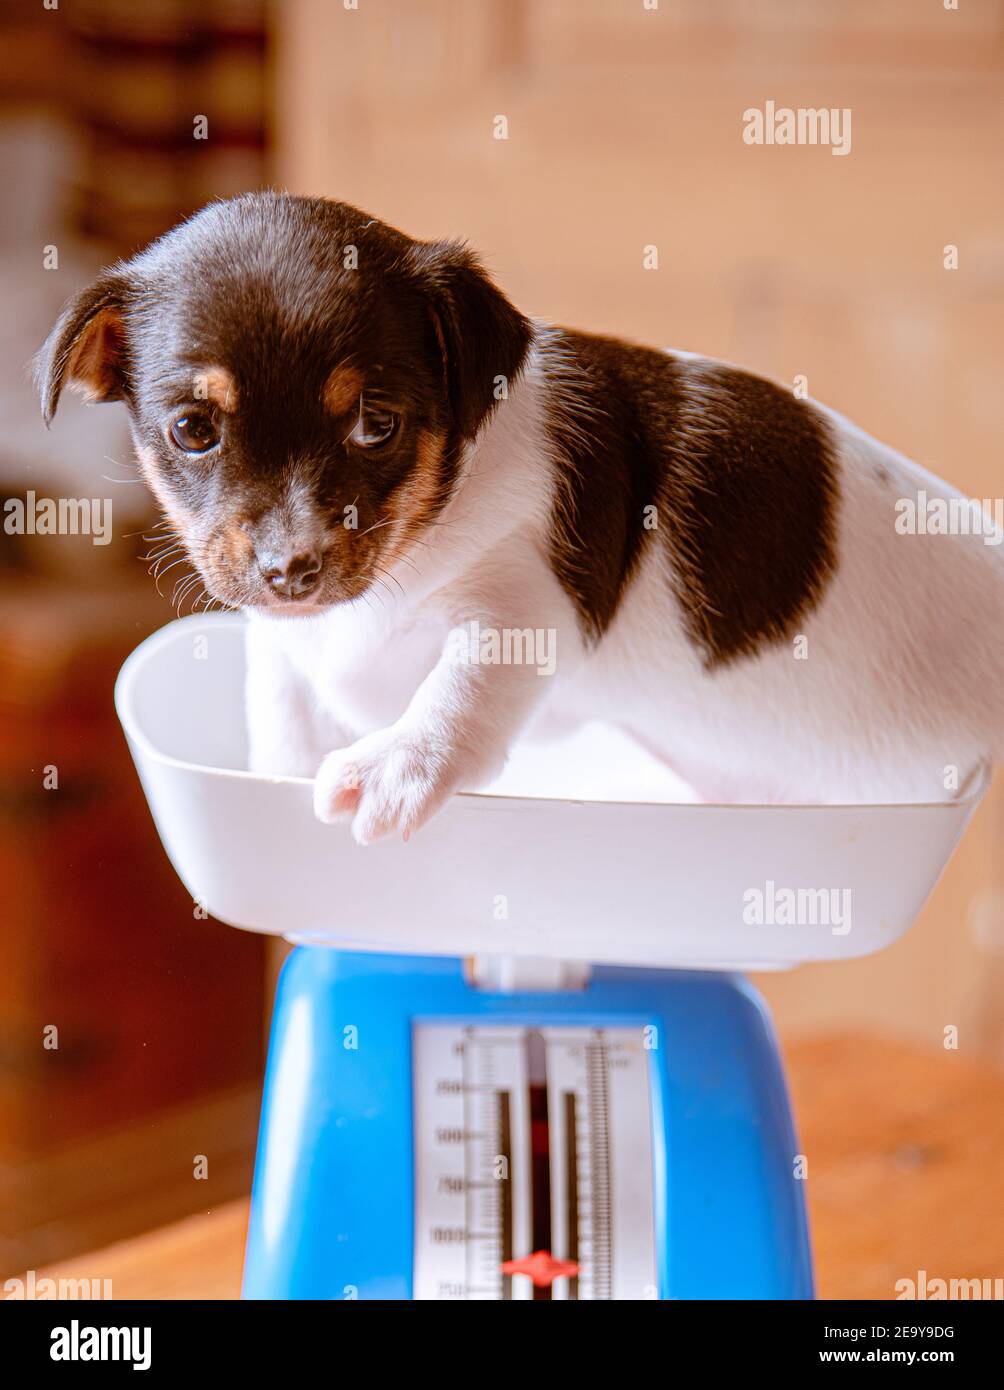 https://c8.alamy.com/comp/2E9Y9DG/adorable-jack-russell-terrier-puppy-on-weigh-scales-2E9Y9DG.jpg